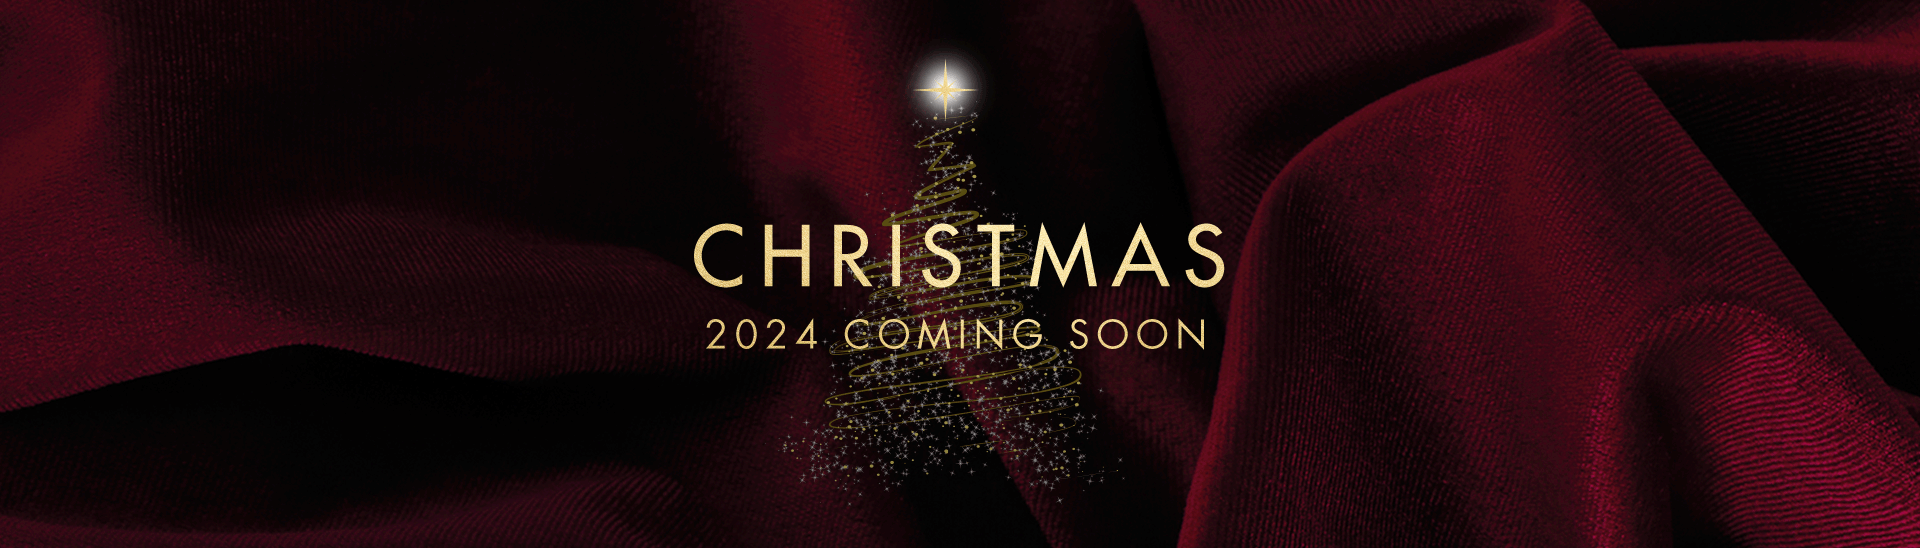 Christmas 2024 at Gloucester